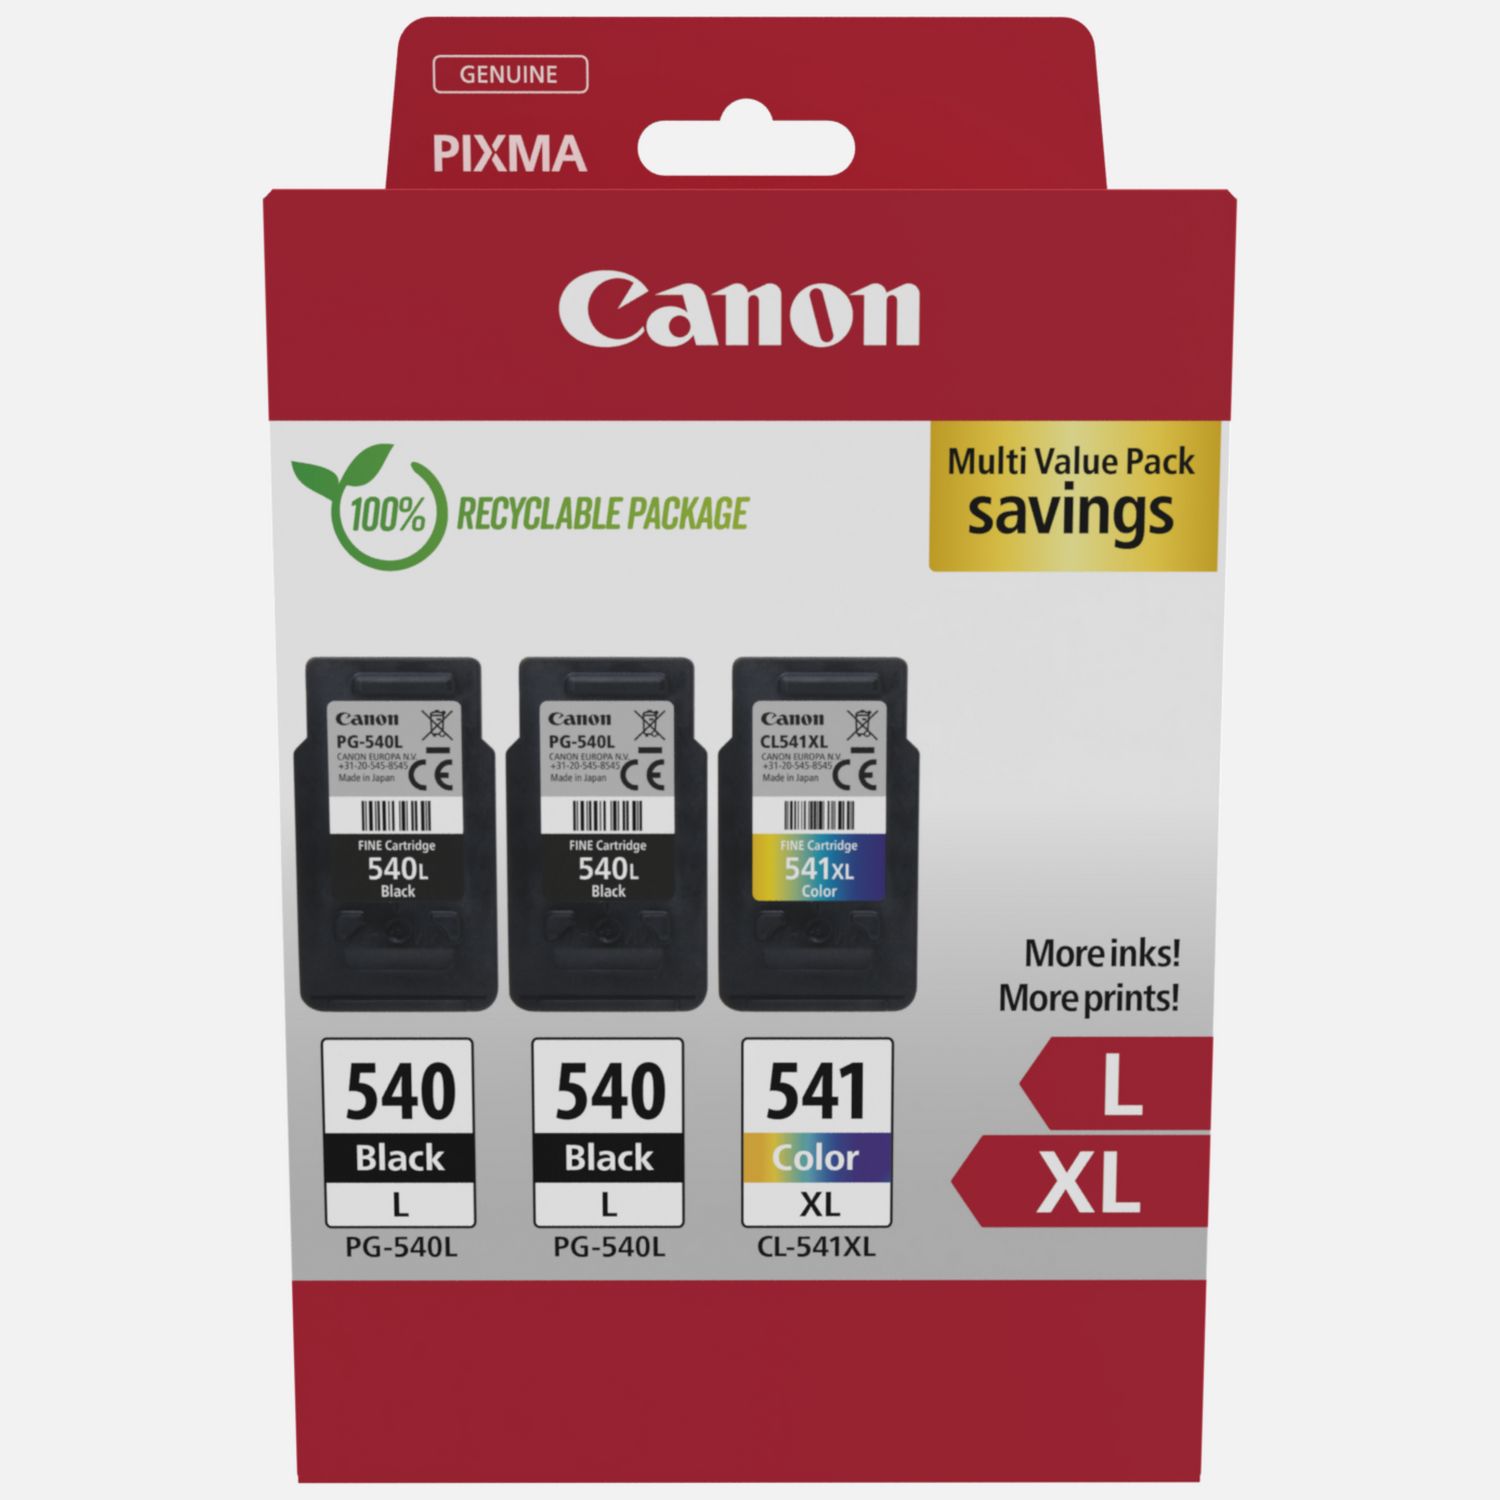 Multipack Cheap printer cartridges for Canon Pixma MG3650